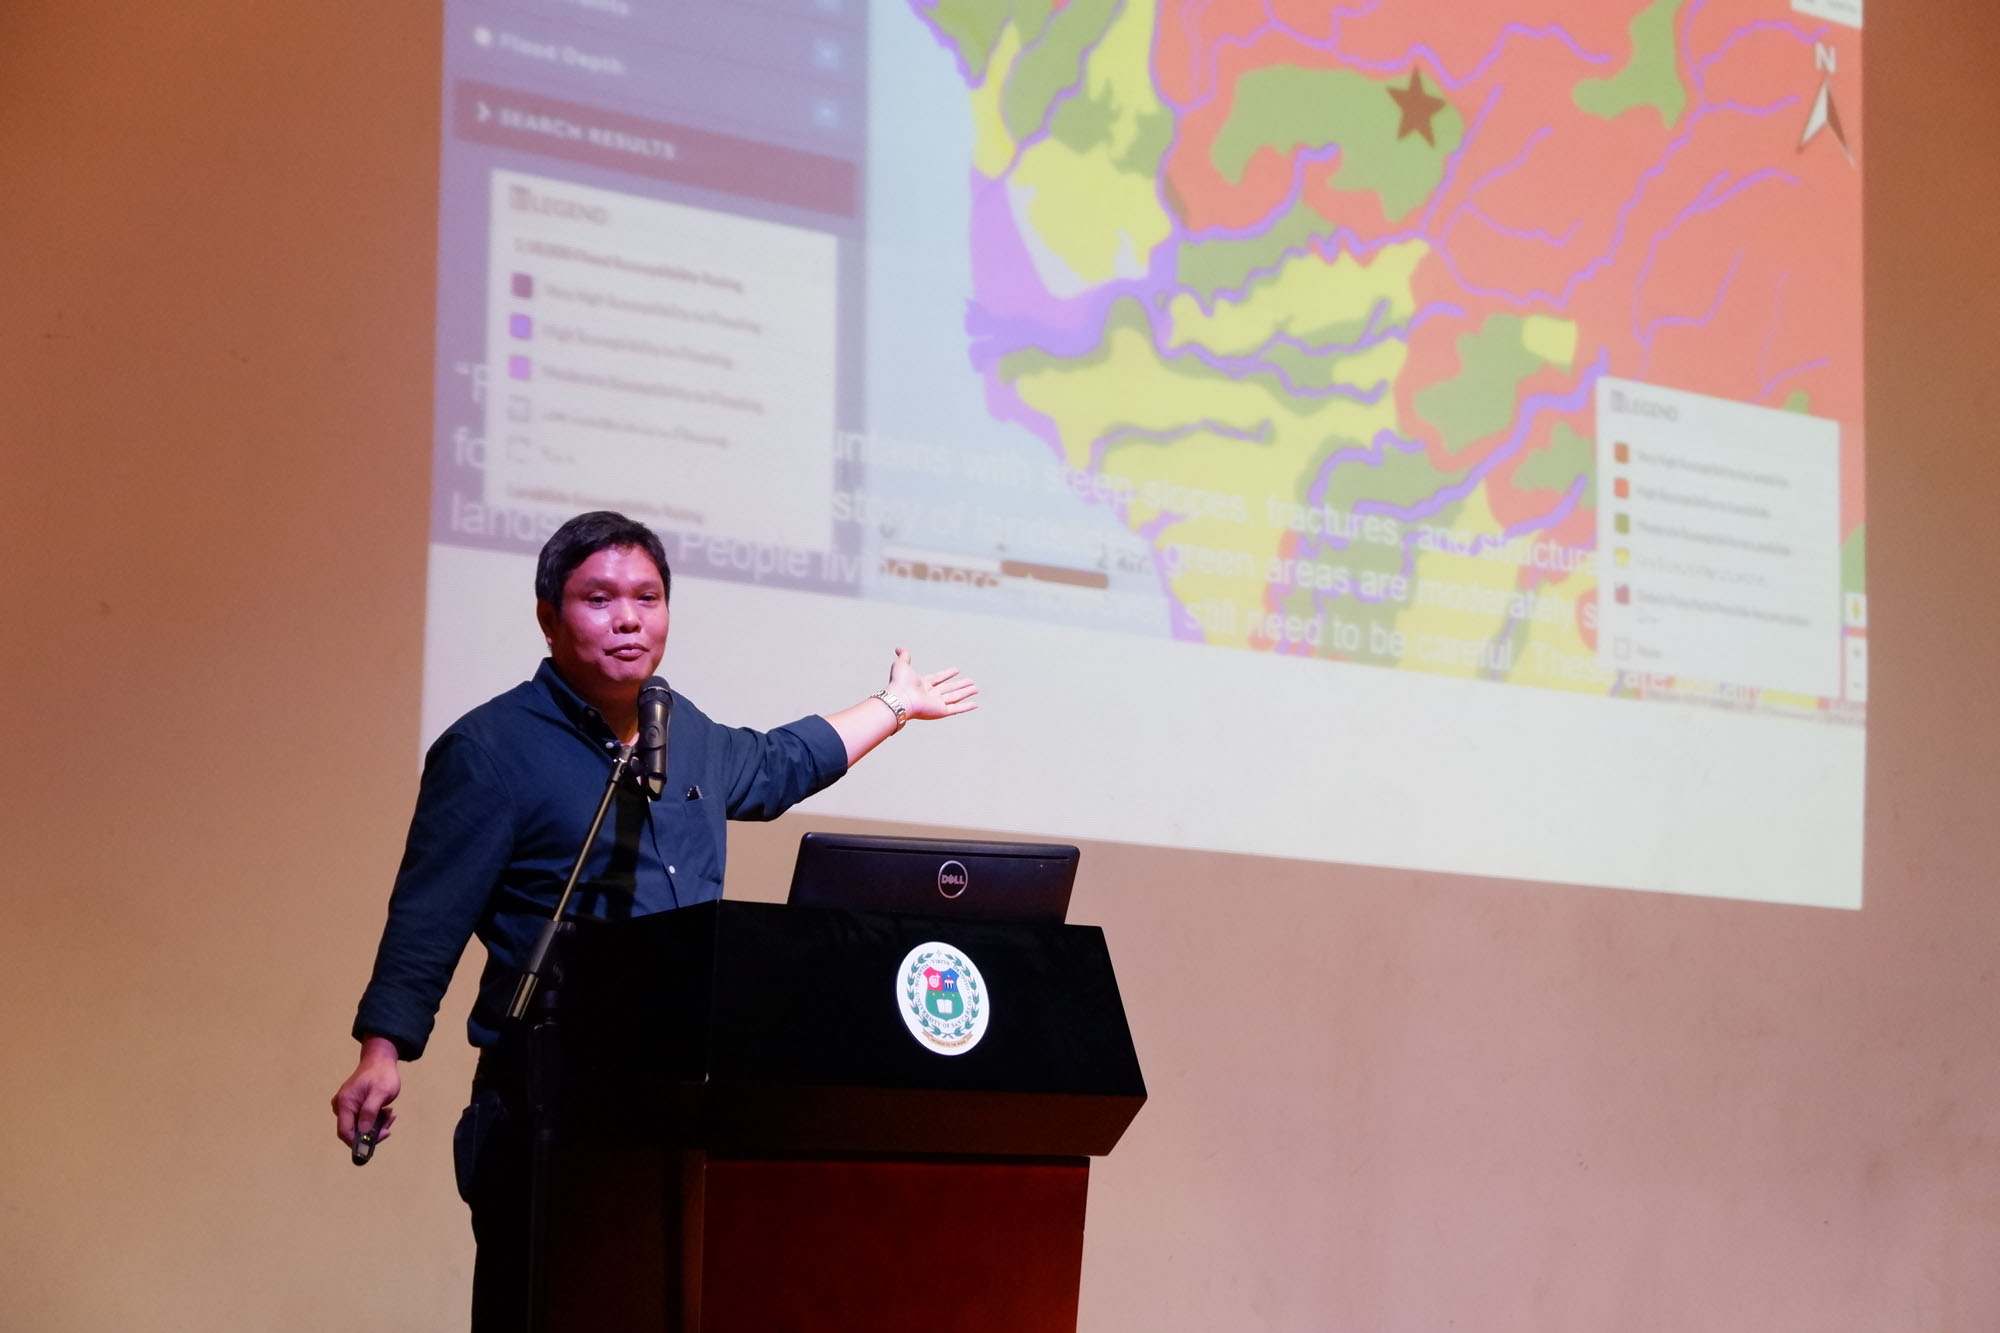 PASCN Regional Symposium on Disruptive Technologies: Opportunities, Challenges, and Risks-pascn-usc-36-20190123.jpg